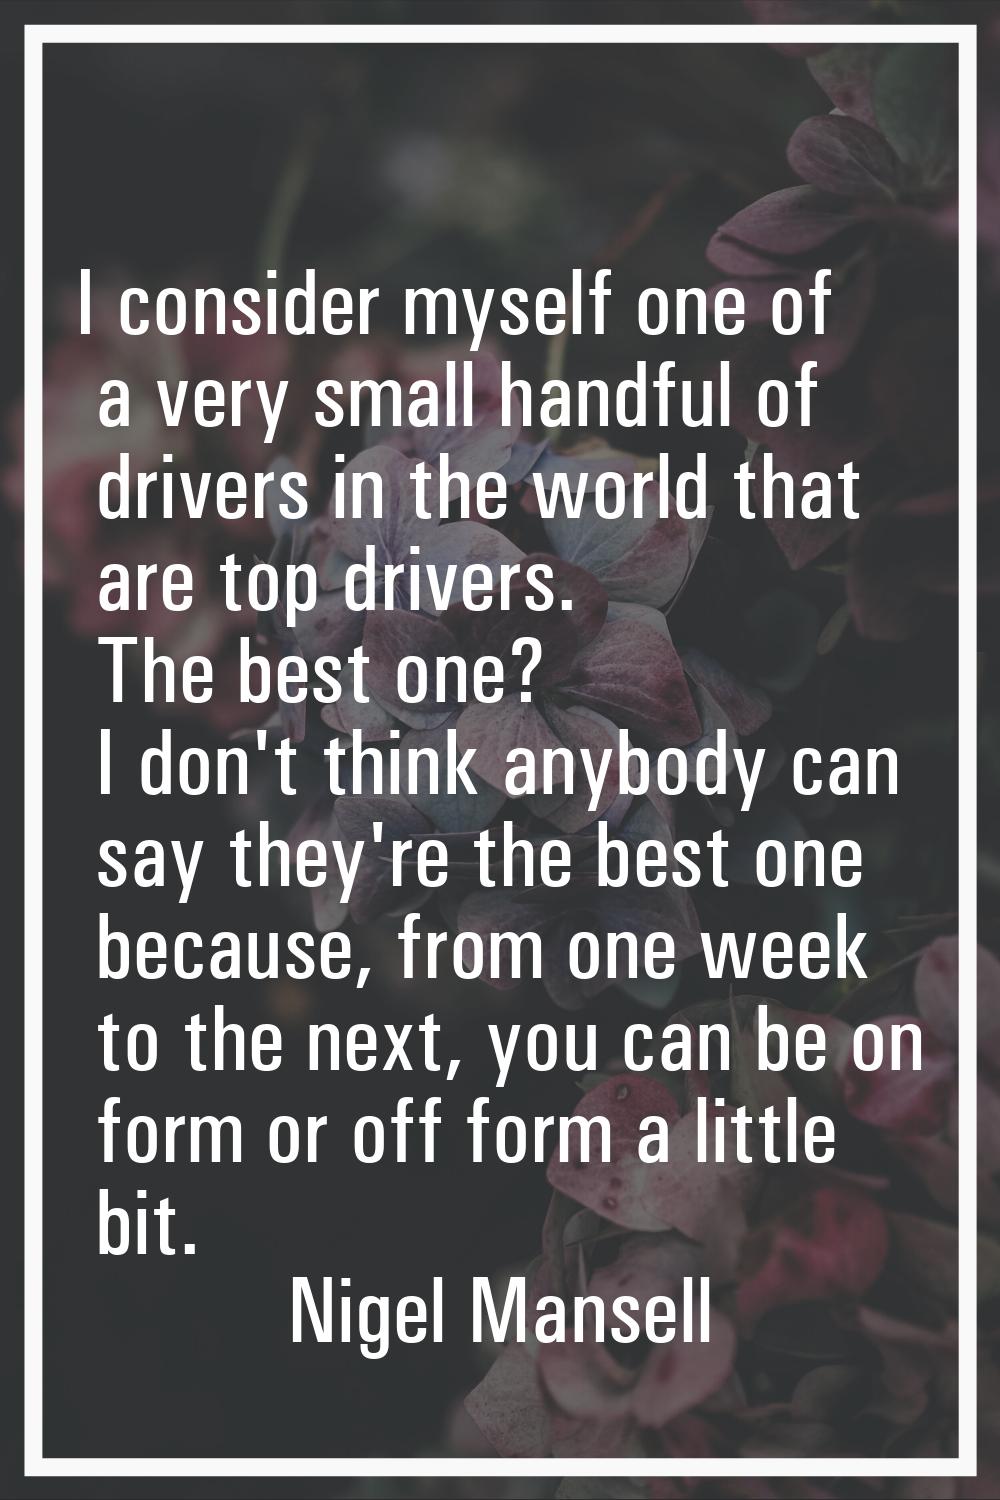 I consider myself one of a very small handful of drivers in the world that are top drivers. The bes